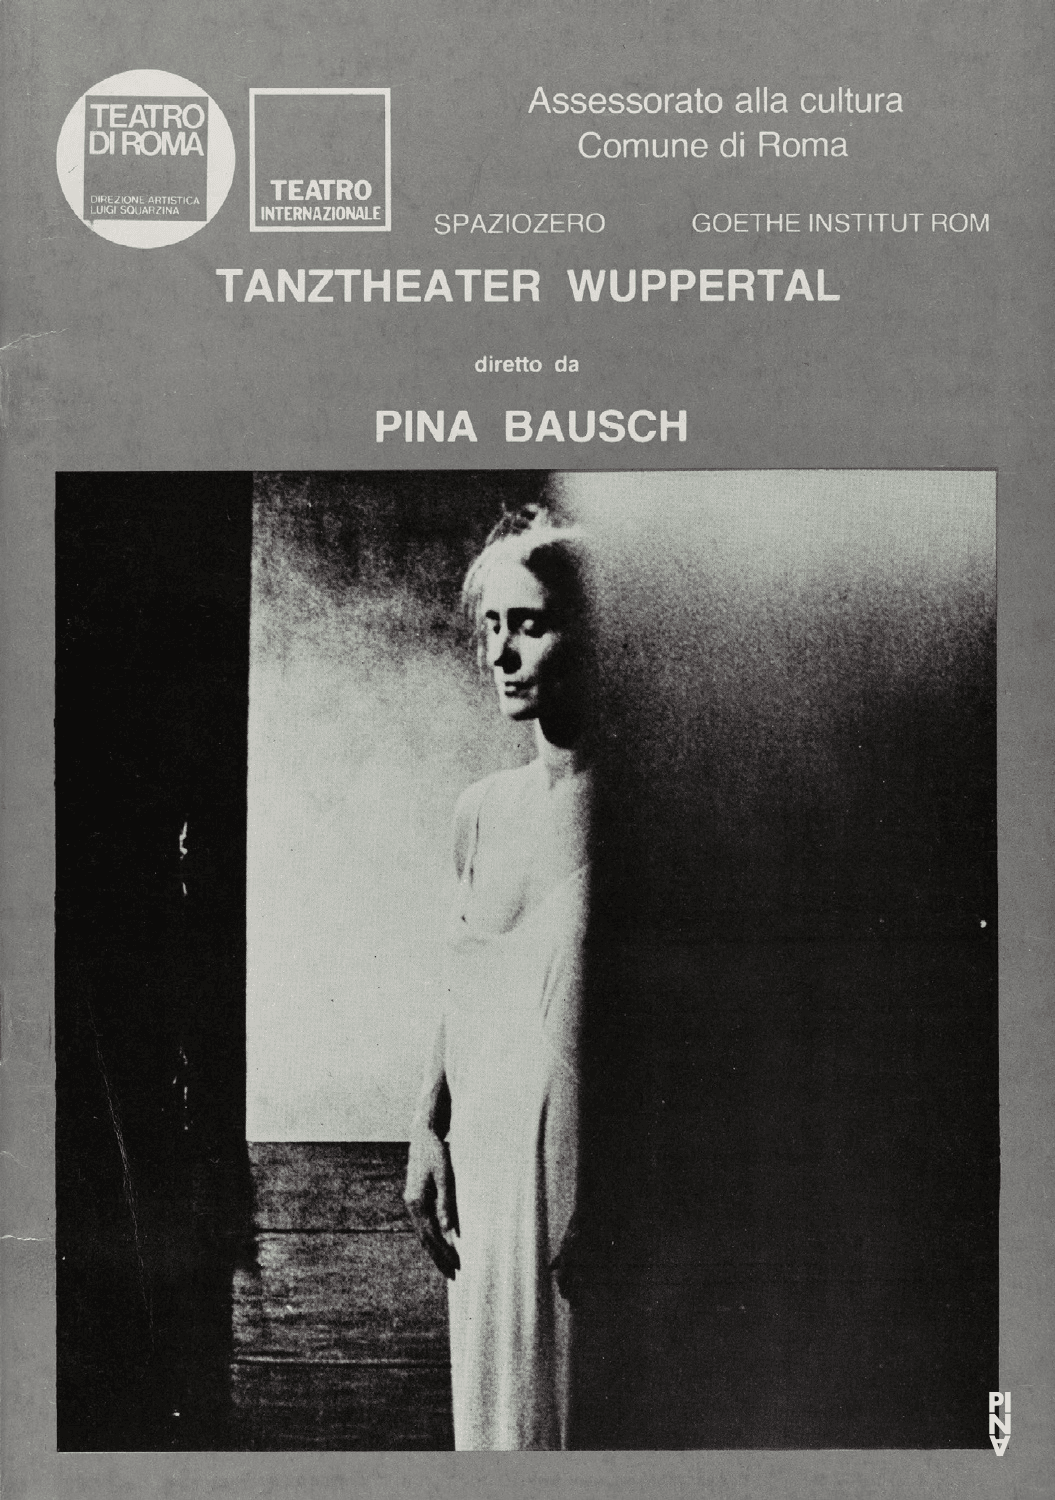 Booklet for “Café Müller” and “1980 – A Piece by Pina Bausch” by Pina Bausch with Tanztheater Wuppertal in in Rome, 09/28/1982 – 10/01/1982